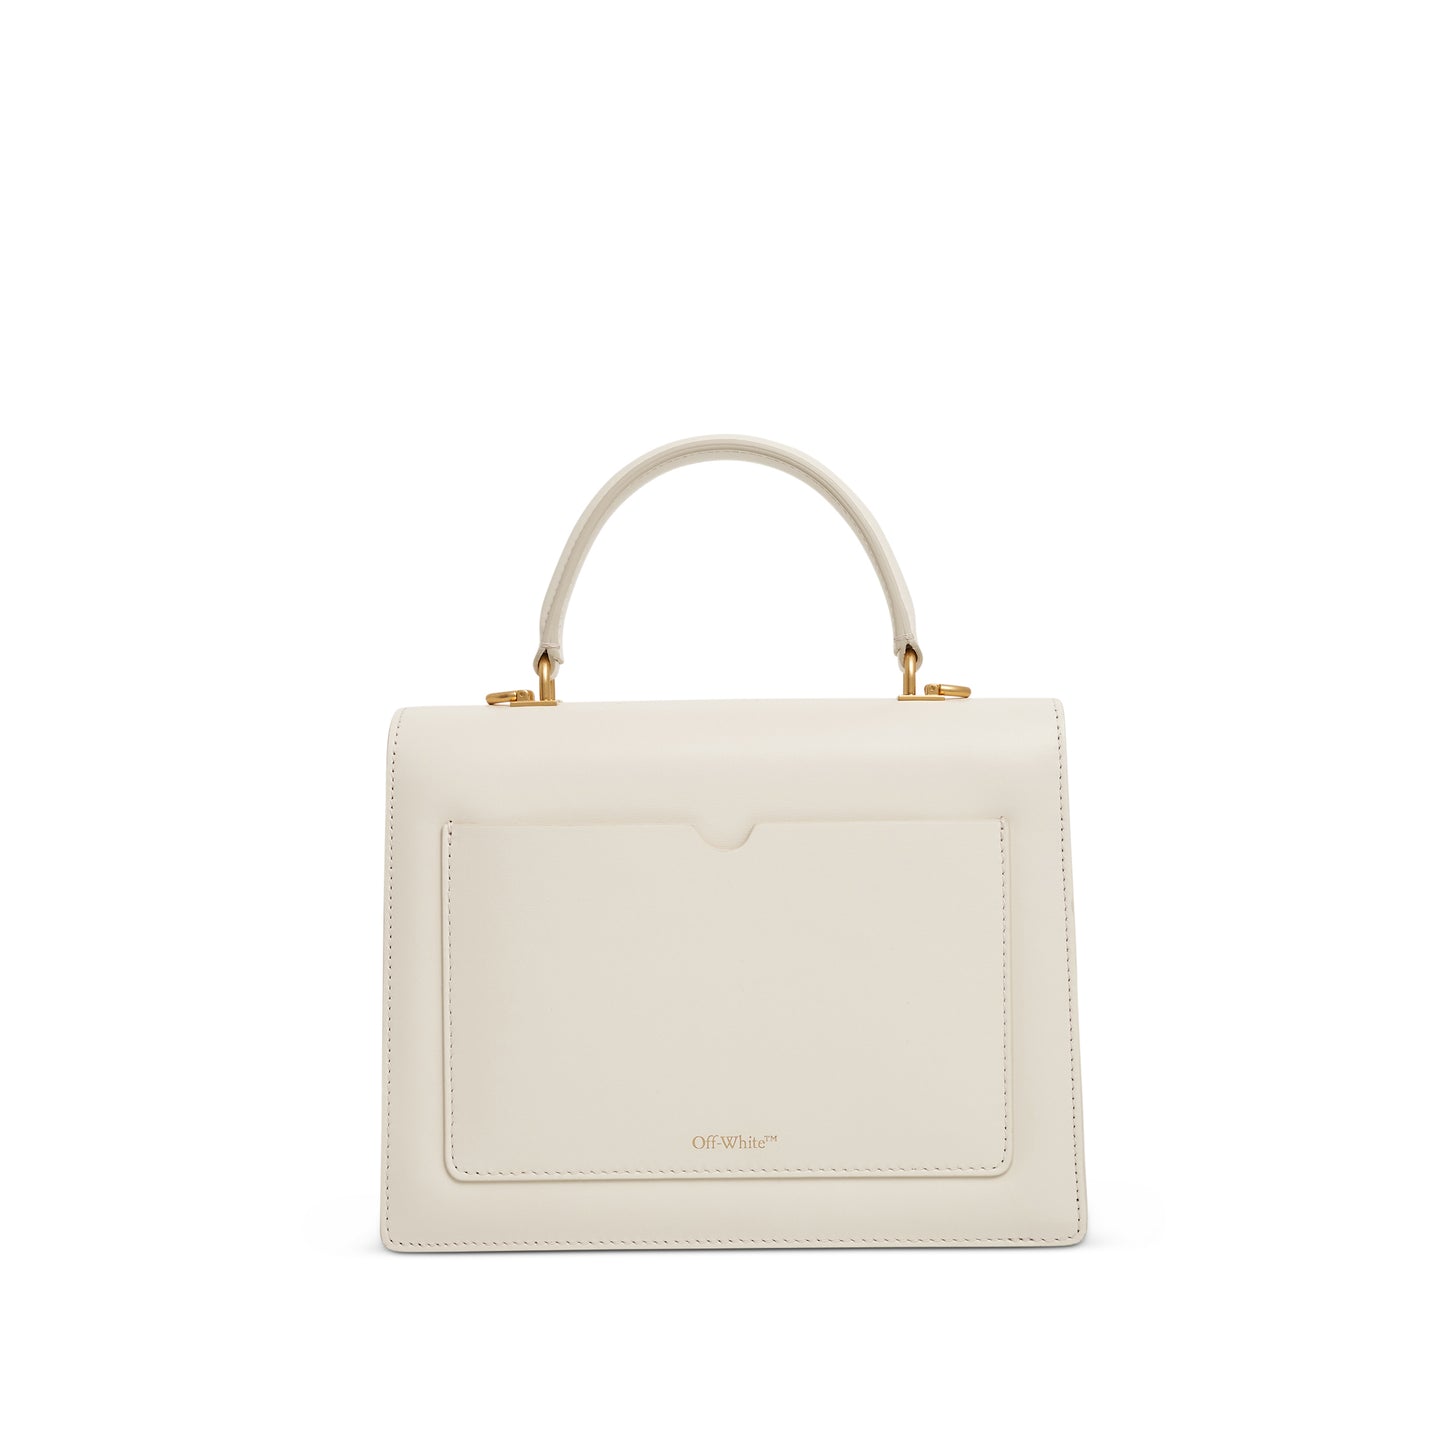 Jitney 2.8 Top Handle Leather Bag in White